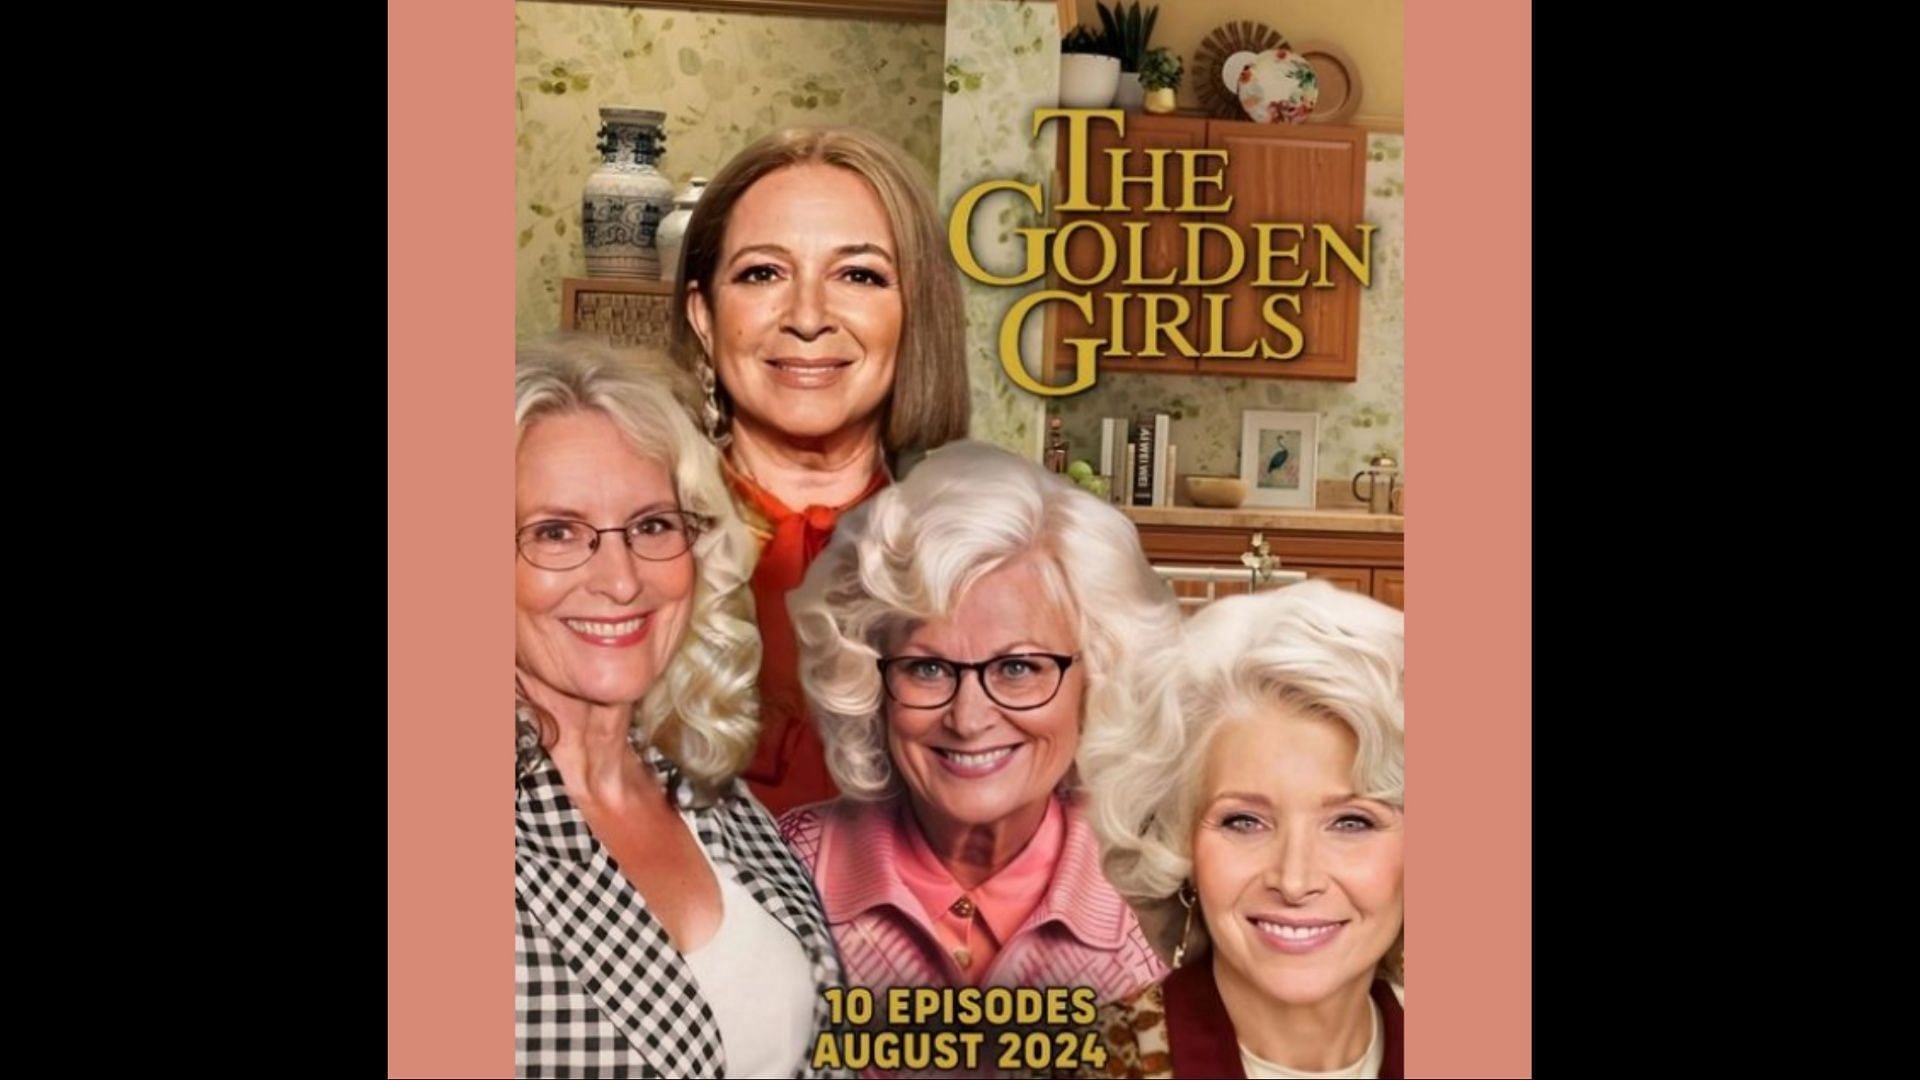 Claims of a Golden Girls reboot making it to Disney+ spread like wildfire (Image via YODA BBY ABY/Facebook)